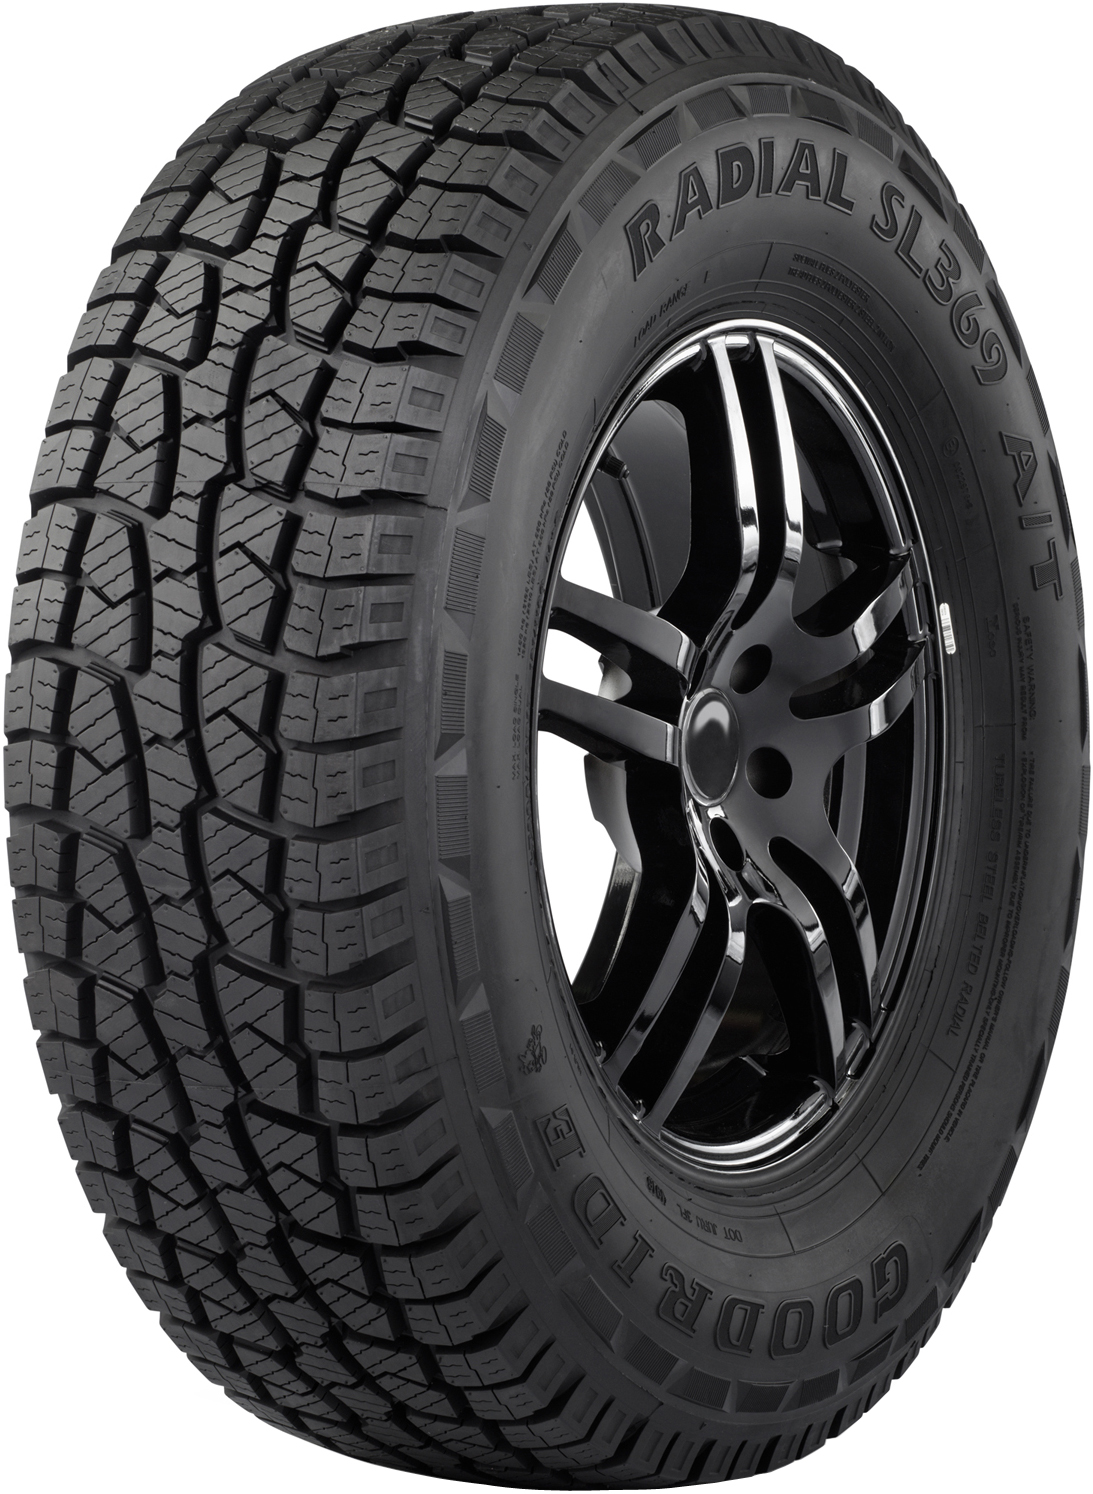 Anvelope jeep GOODRIDE Radial SL369 A/T XL 215/80 R16 107S